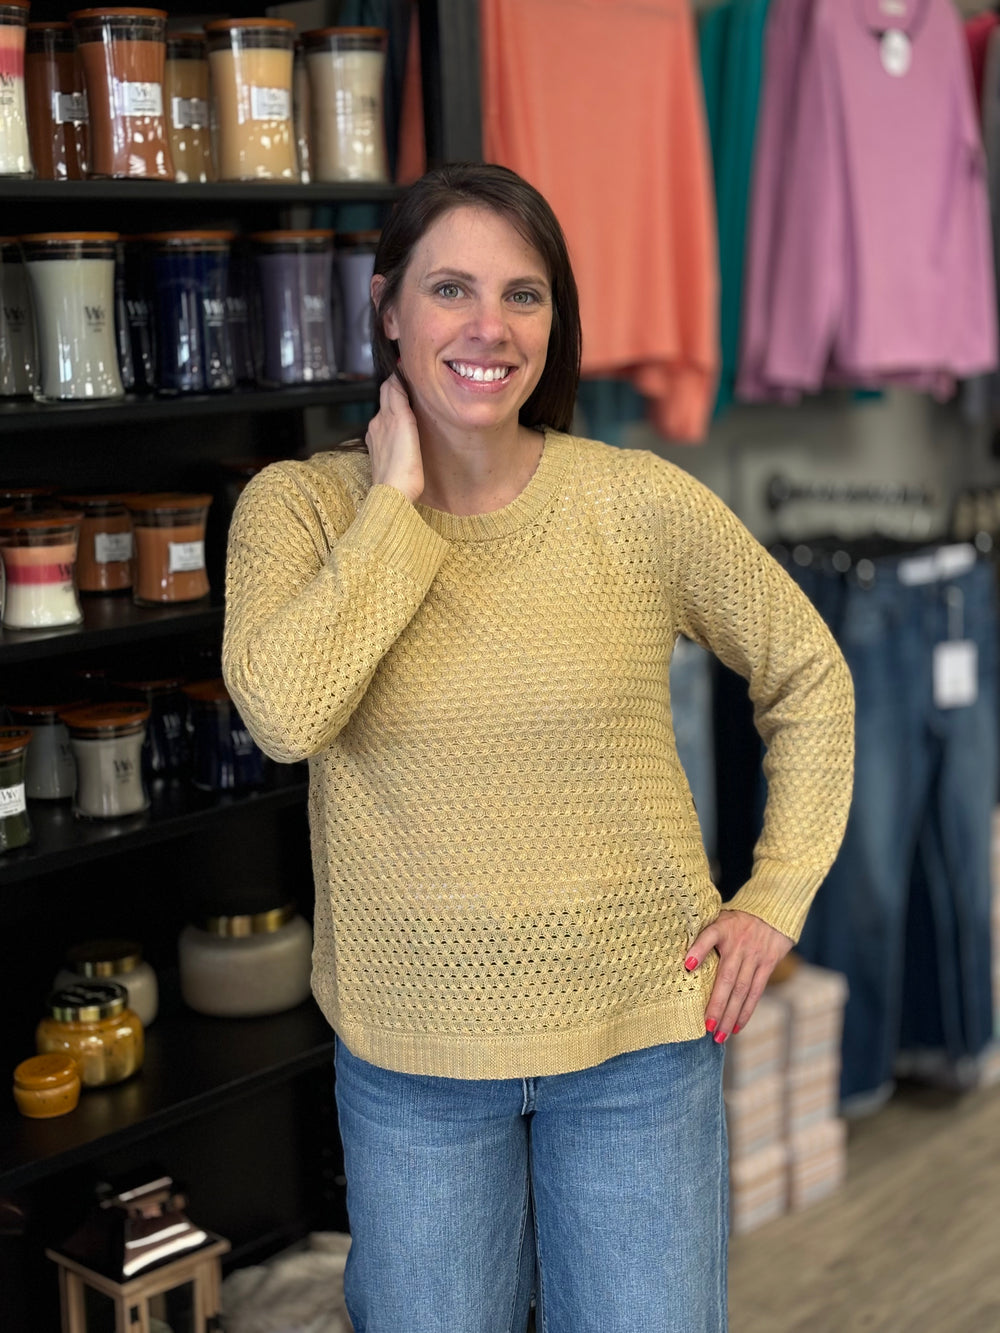 Millie Sweater-Sweaters-Hem & Thread-Evergreen Boutique, Women’s Fashion Boutique in Santa Claus, Indiana